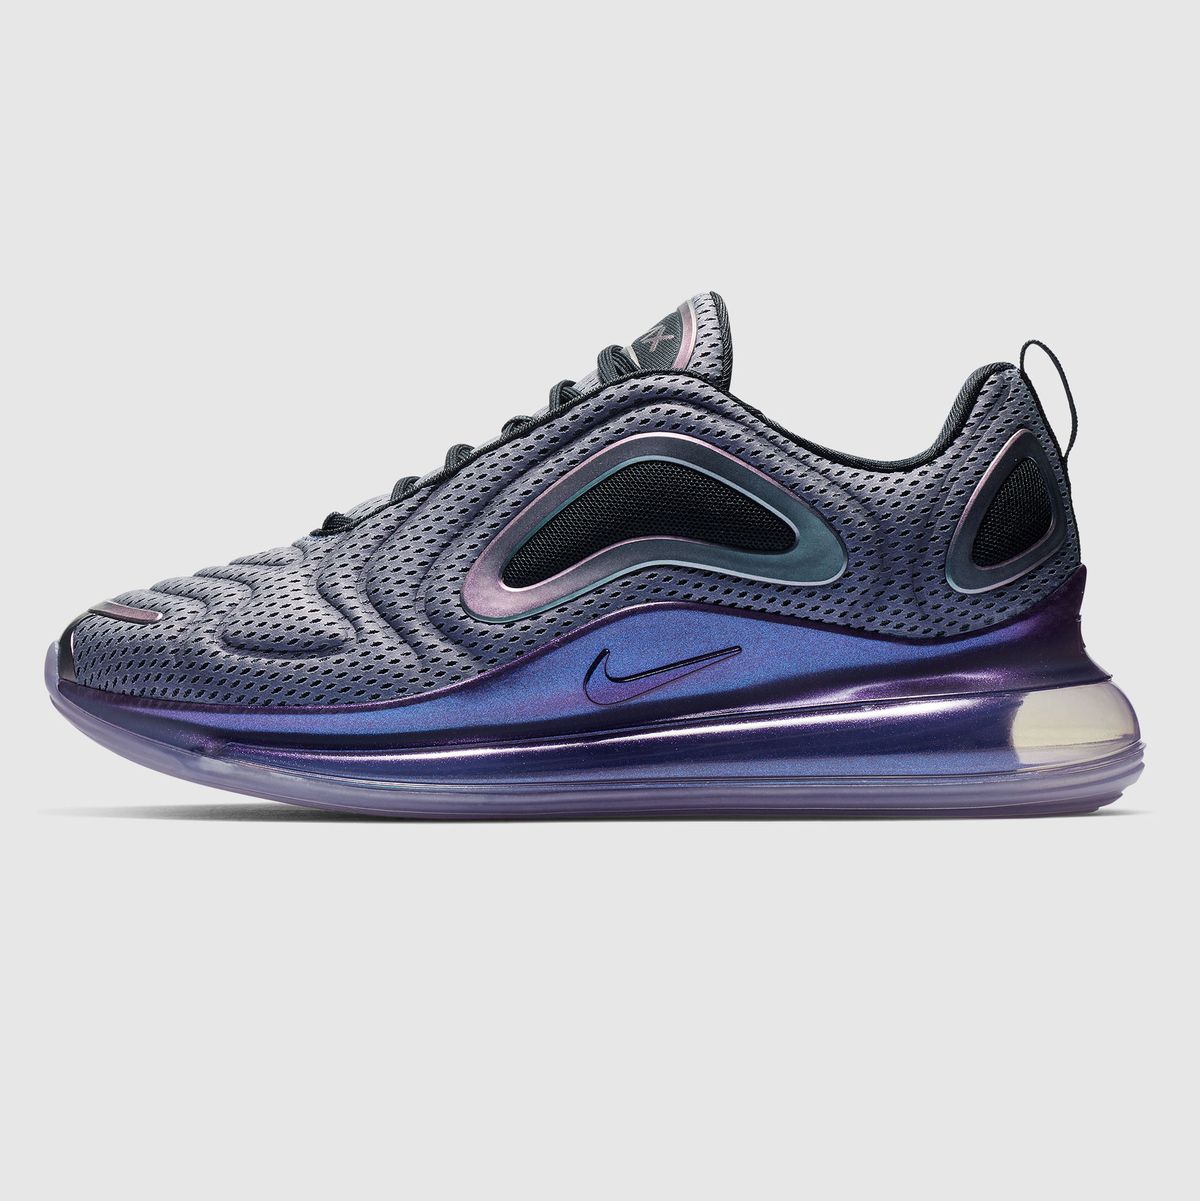 Air Max 720 Just Got Its Full, Official Reveal - Air Max 720 Release Date